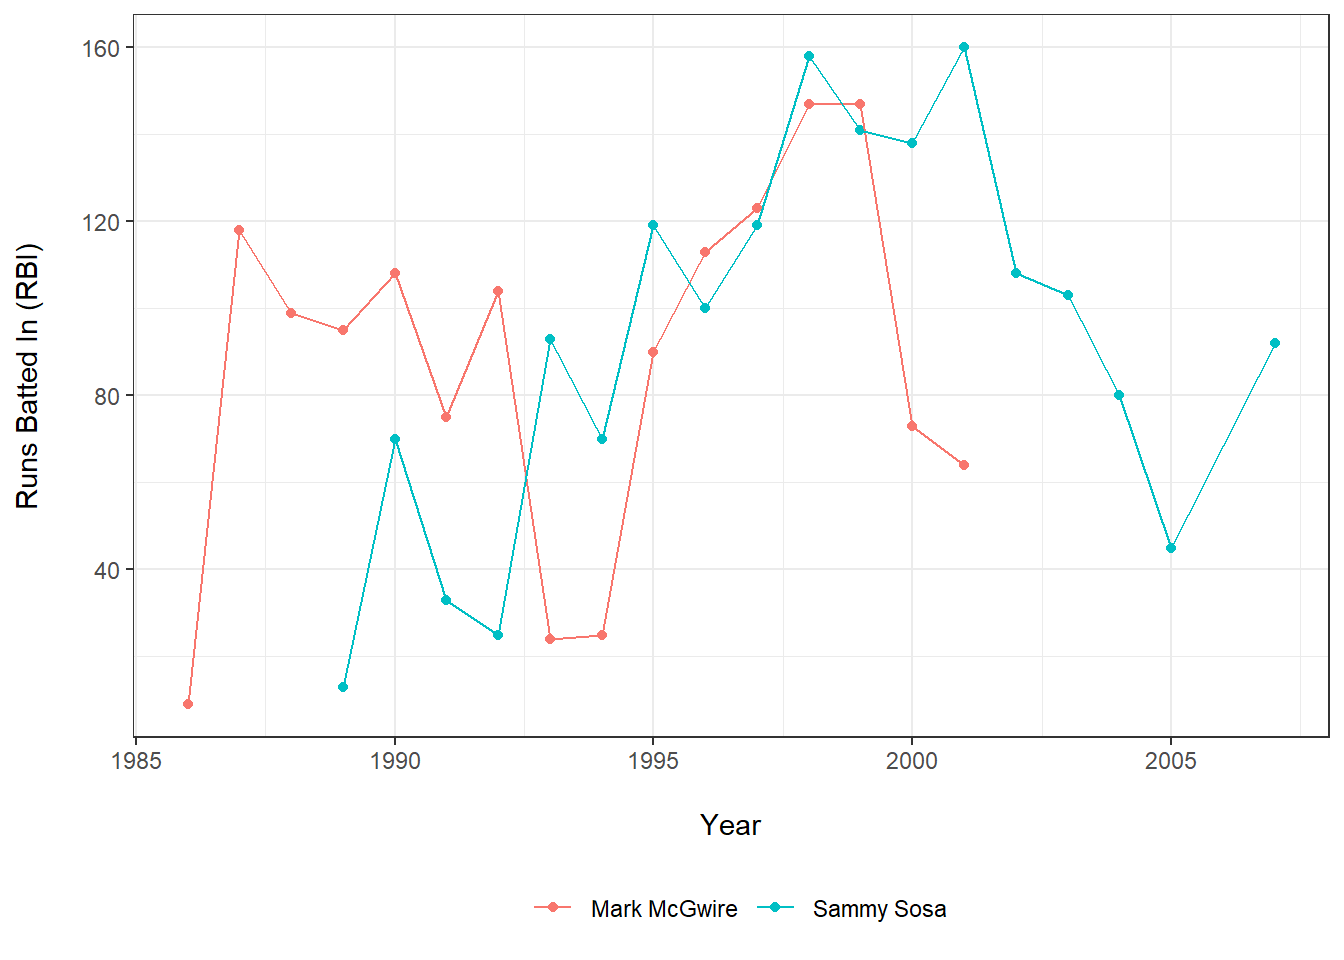 A line graph comparing the number of runs batted in by Mark McGwire versus Sammy Sosa during their MLB careers.